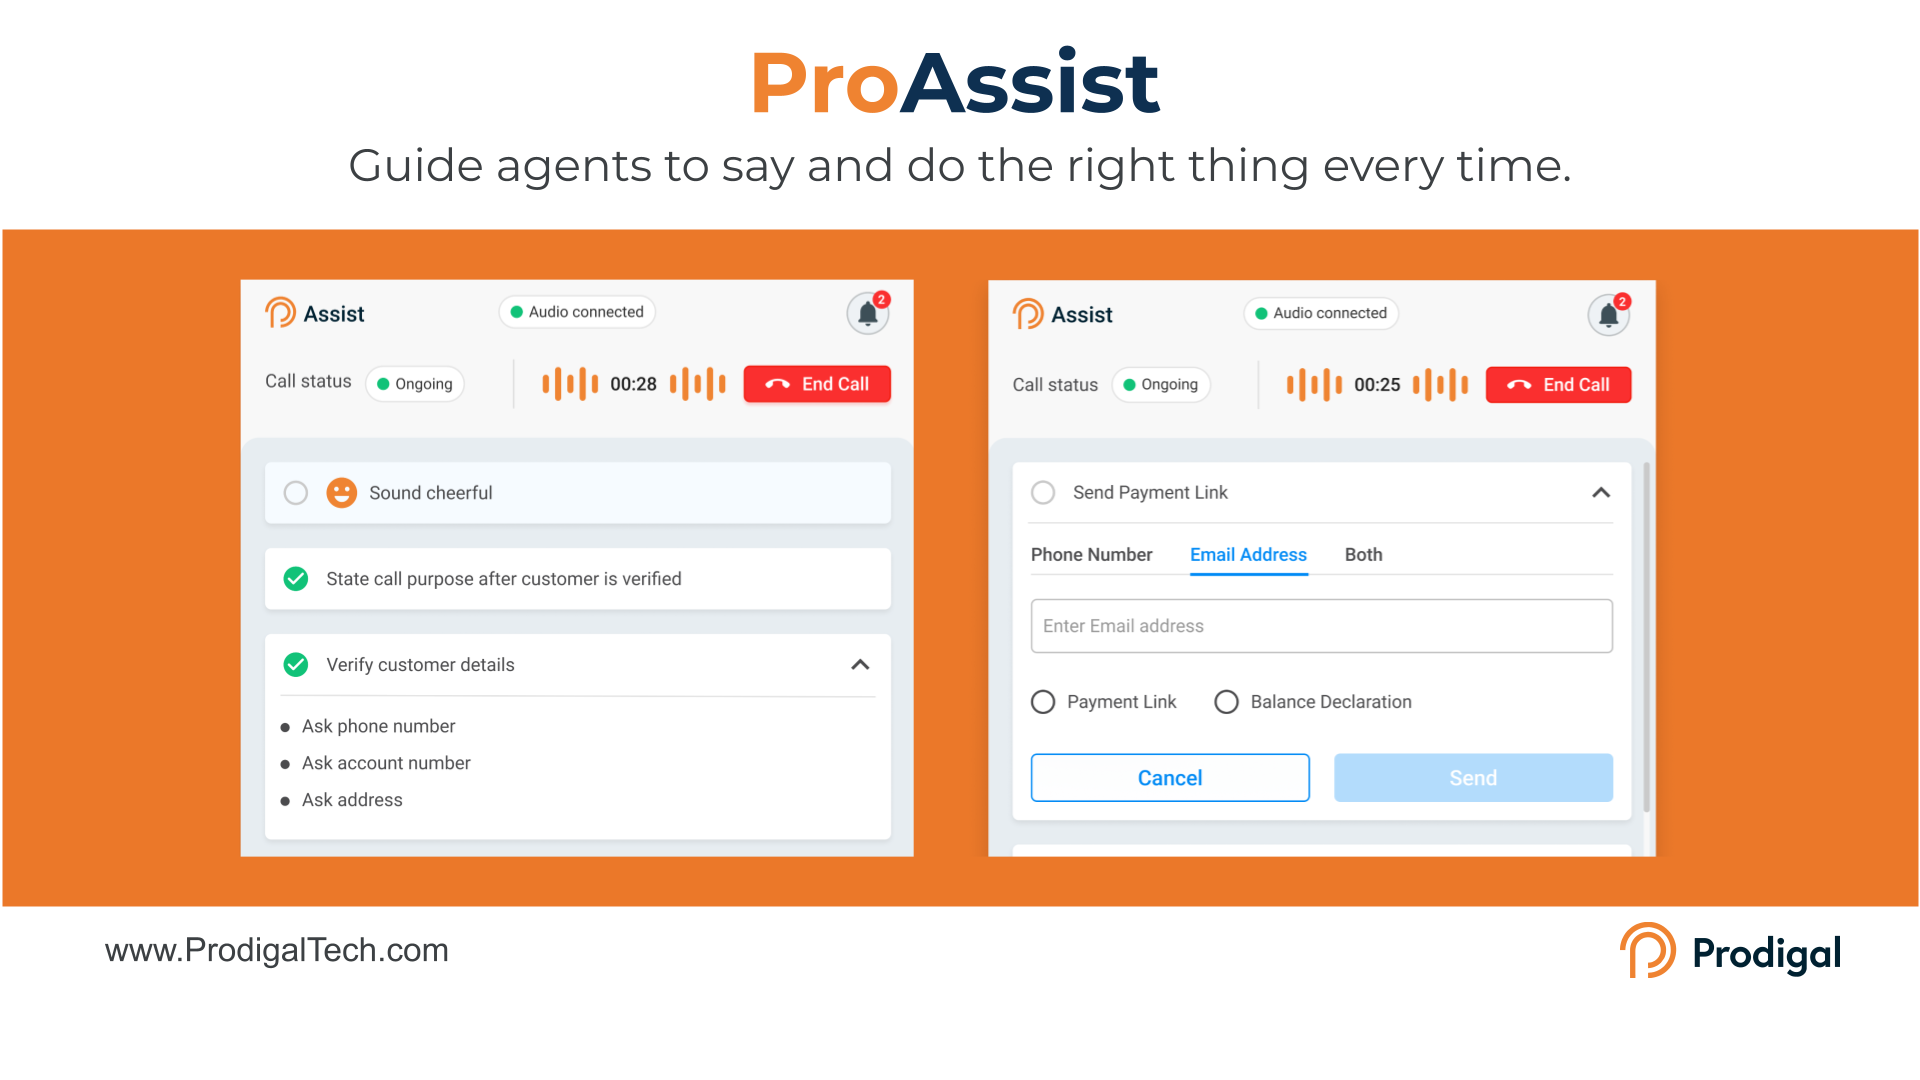 ProAssist guides agents to say and do the right thing every time.